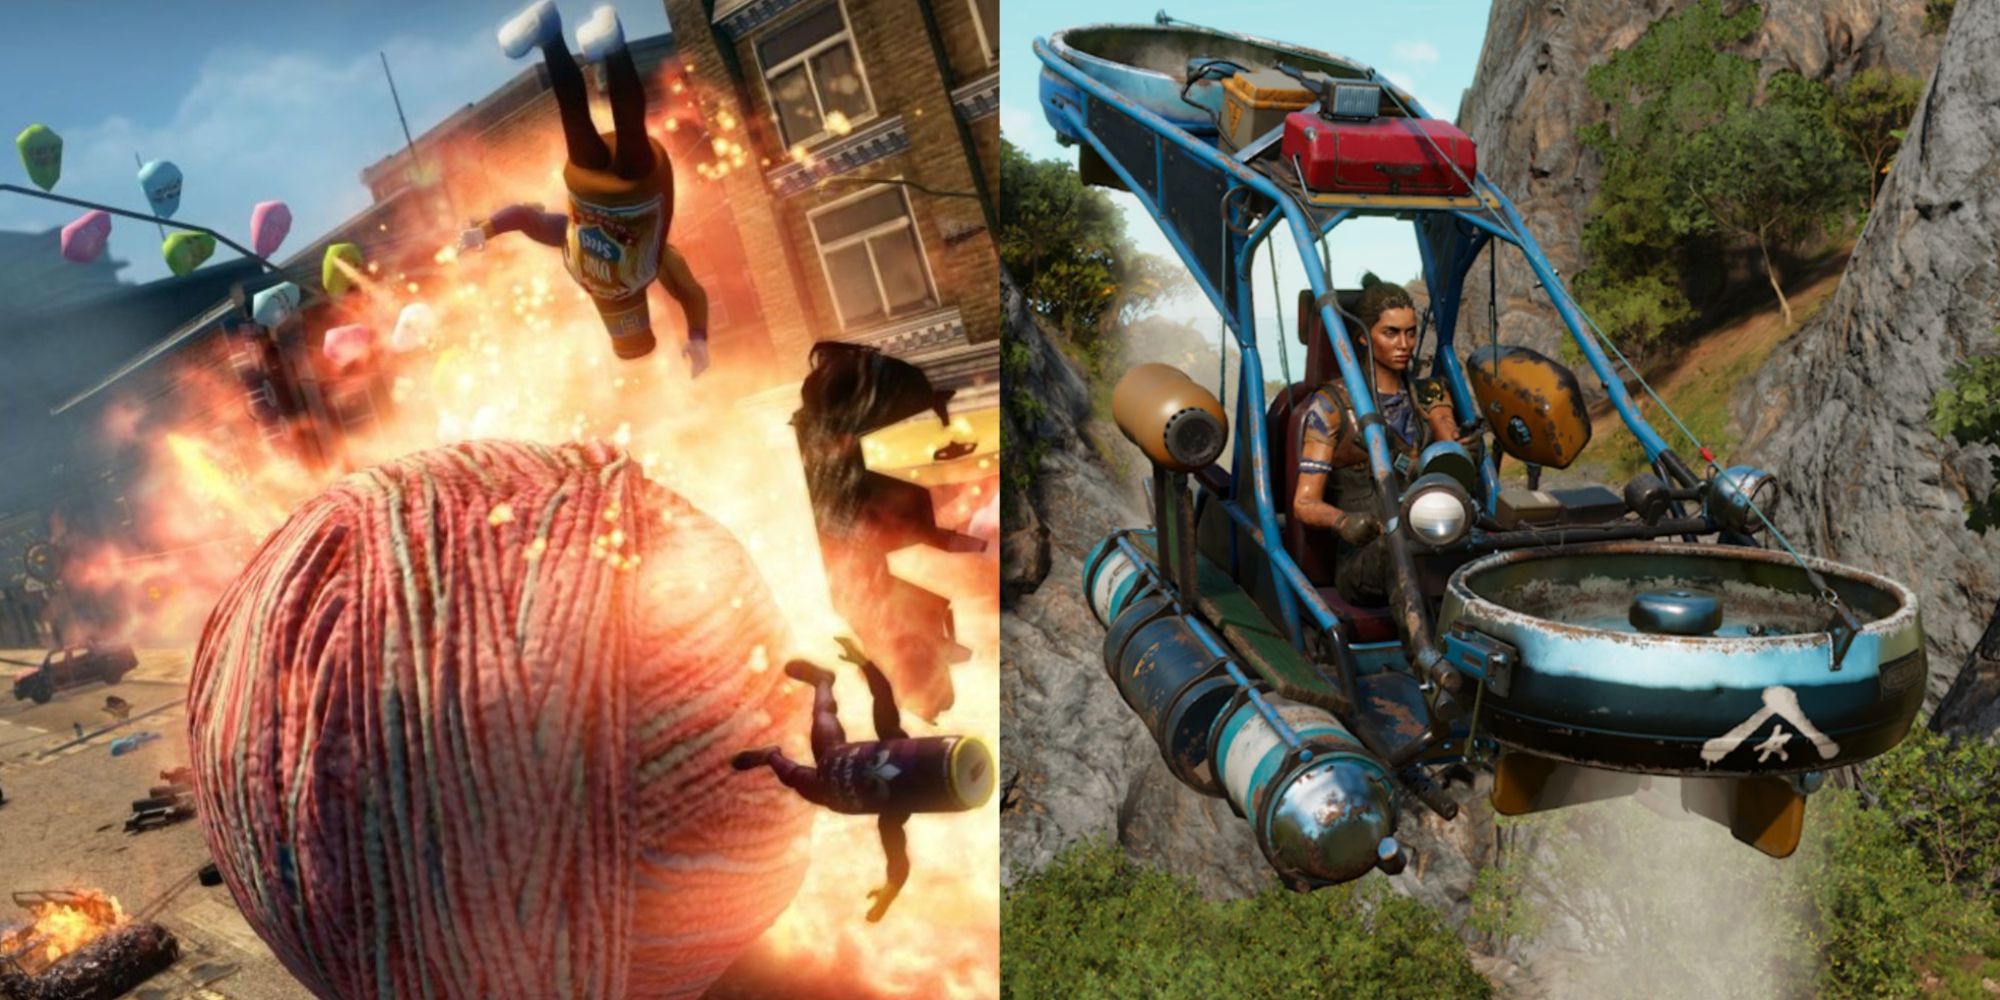 Unconventional Vehicles In Games Featured Split Image Saints Row and Far Cry 6